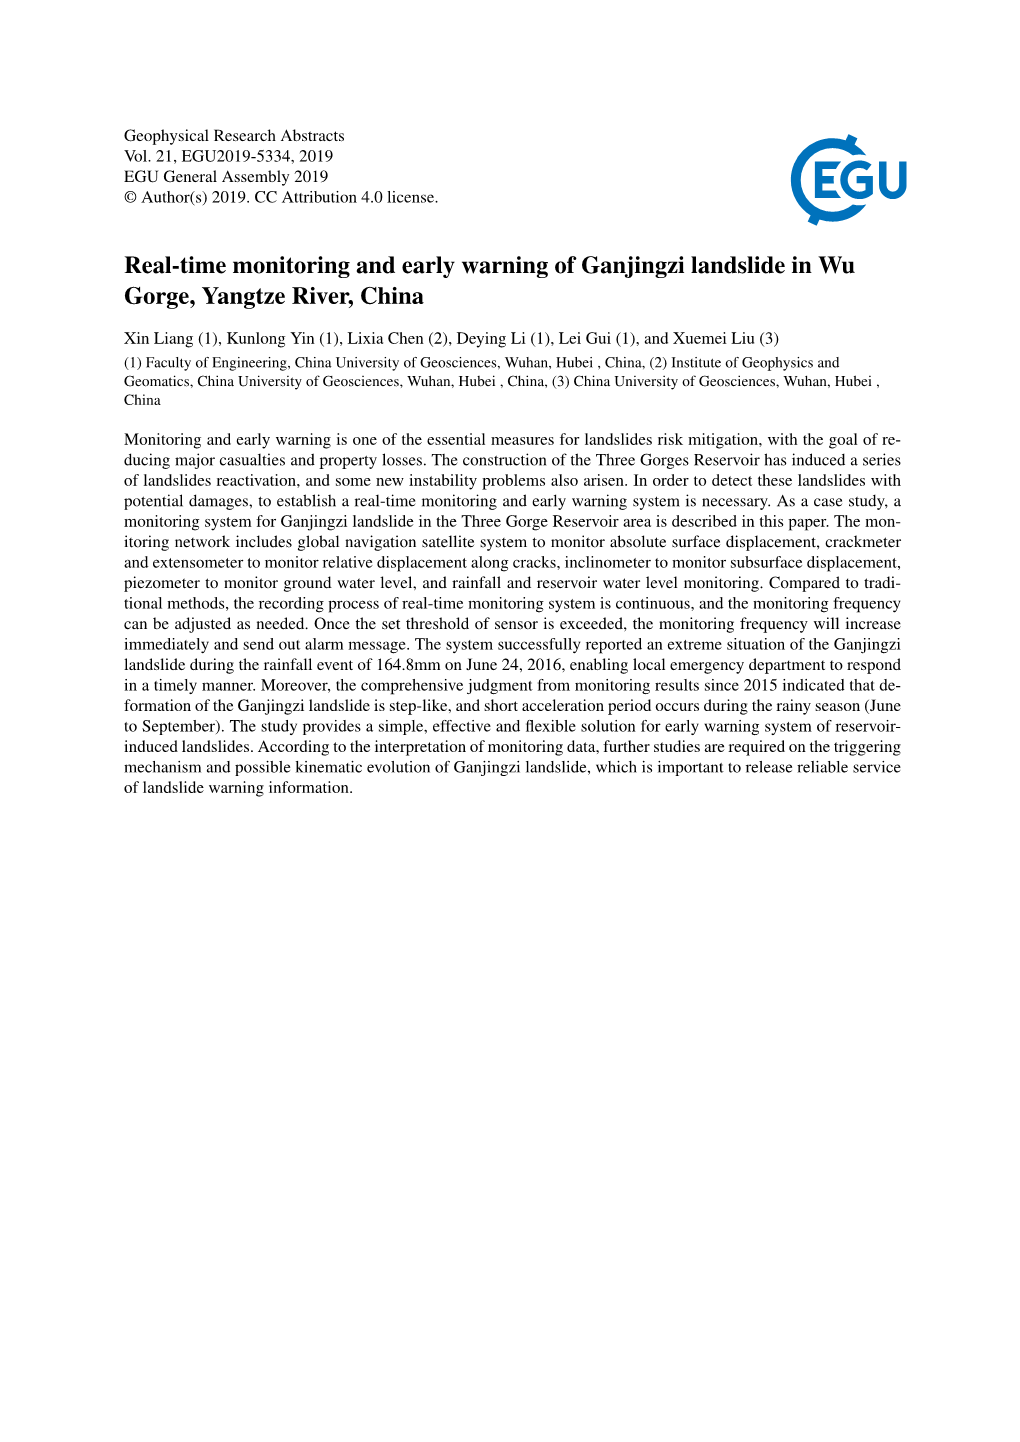 Real-Time Monitoring and Early Warning of Ganjingzi Landslide in Wu Gorge, Yangtze River, China